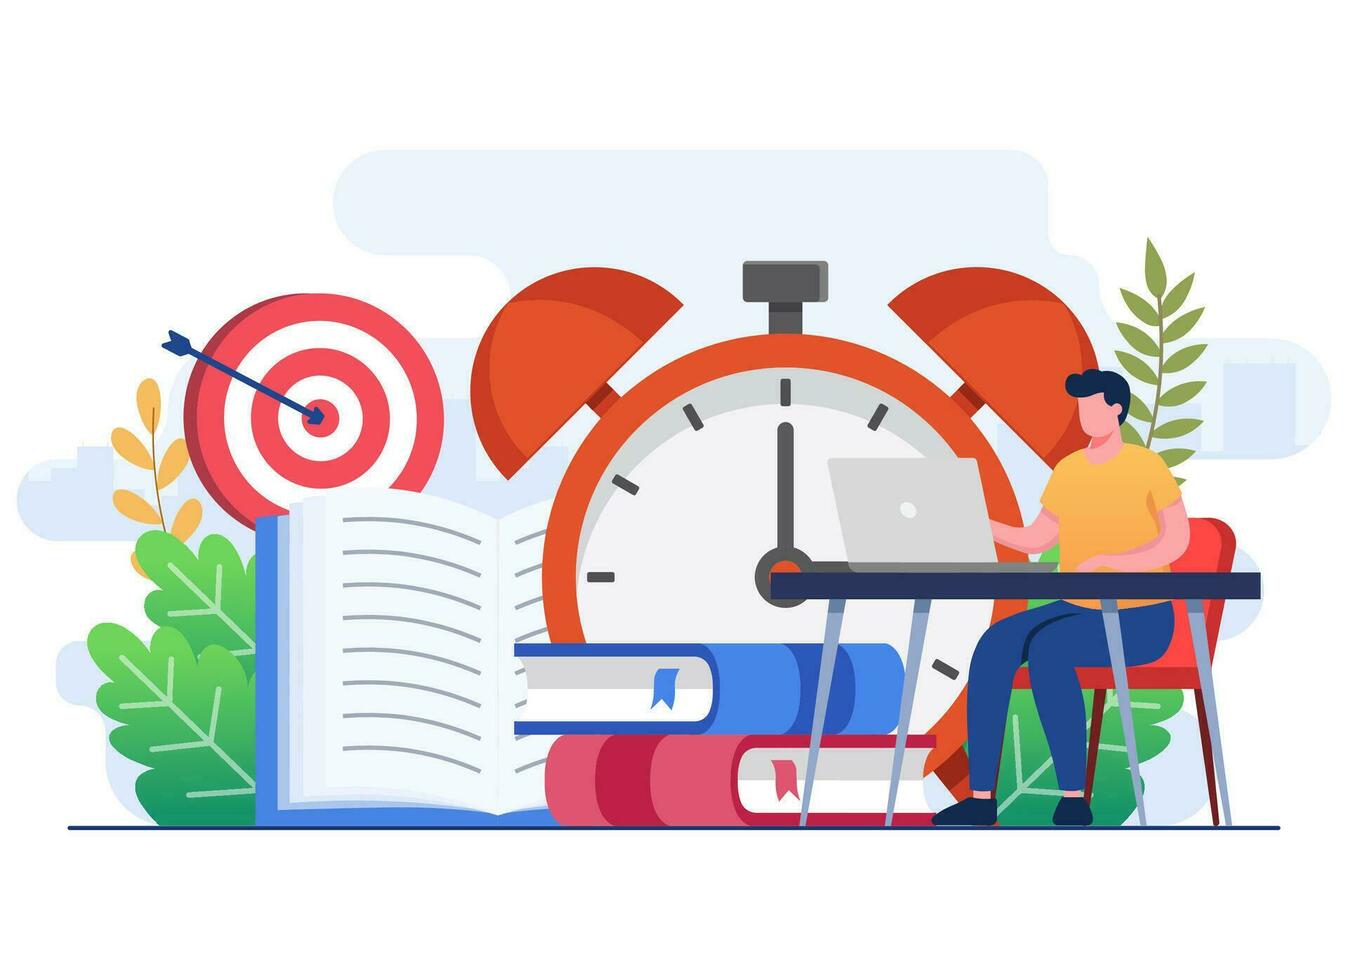 Students prepare for exams flat illustration vector concept, student learning before exam day, doing hard assignments, and preparing for module work, Exam deadline with hourglass